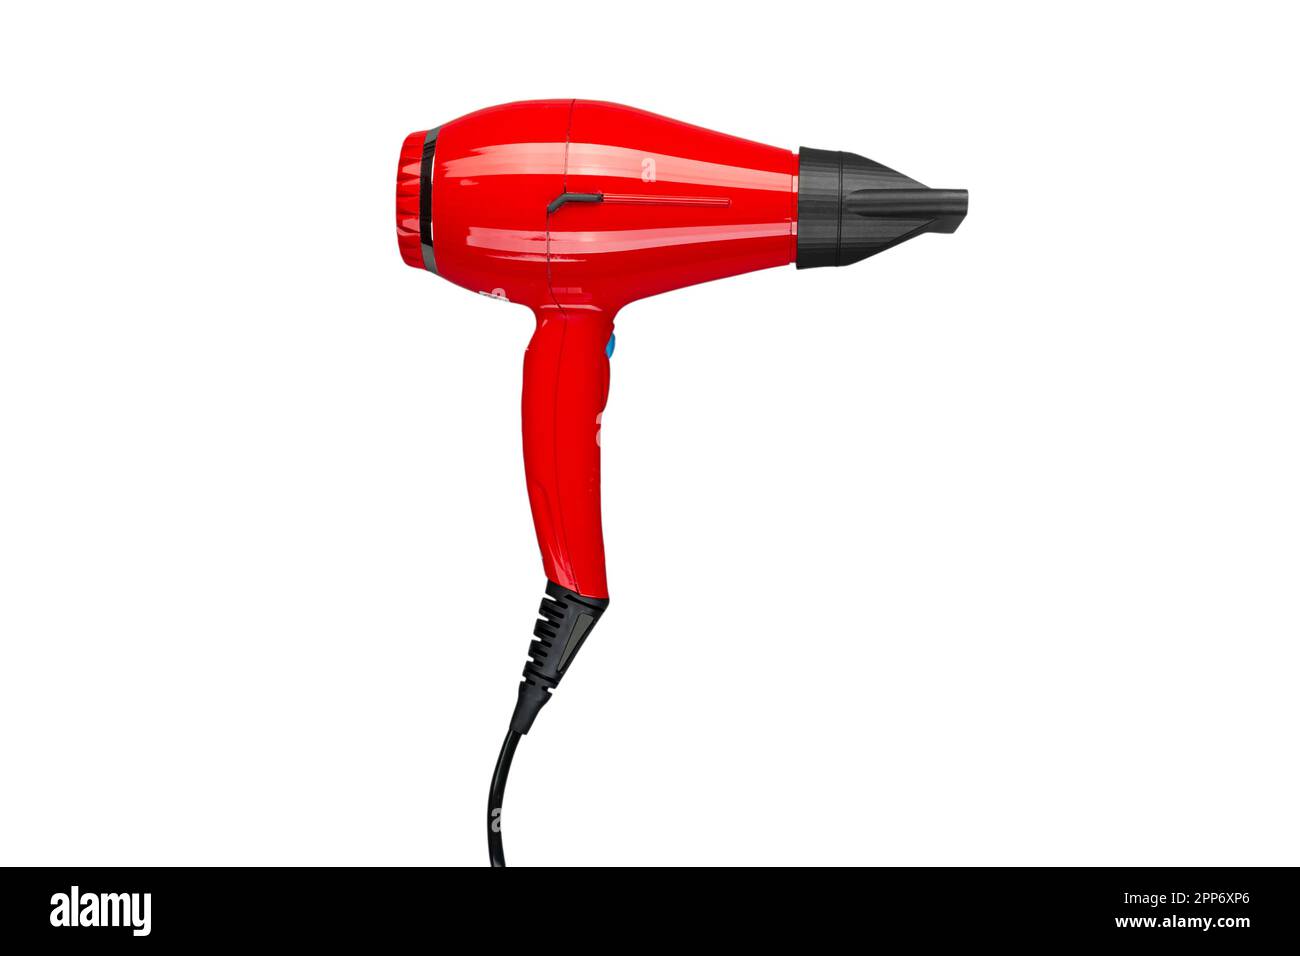 Professional red hair dryer with nozzle. Salon business tool. Isolated on white background. File contains clipping path Stock Photo